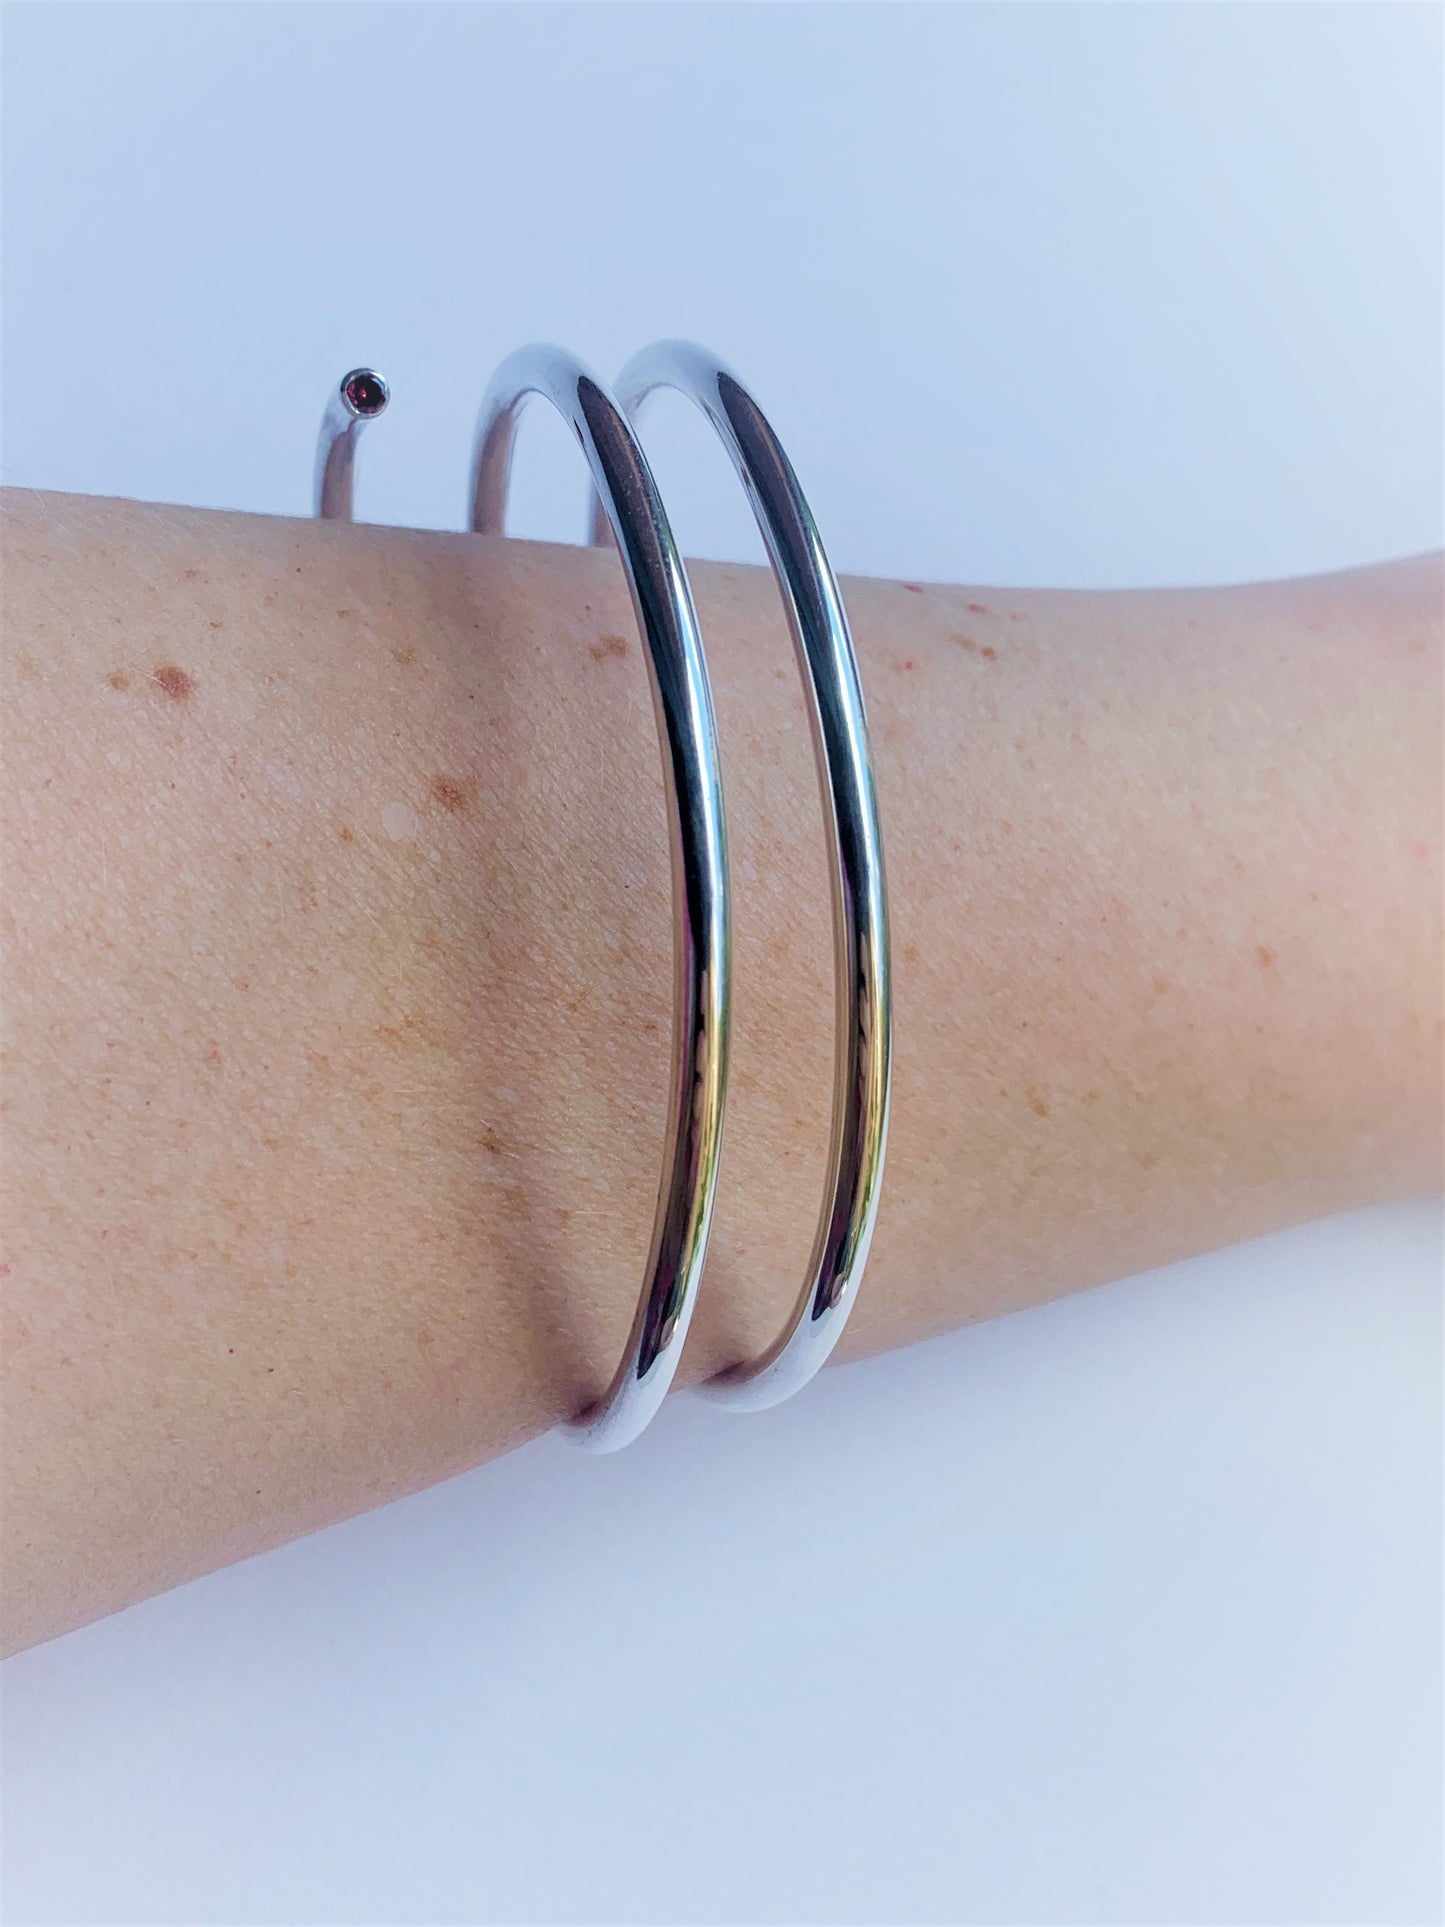 Swirl Arm Cuff / Bangle Solid Sterling Silver with end stones